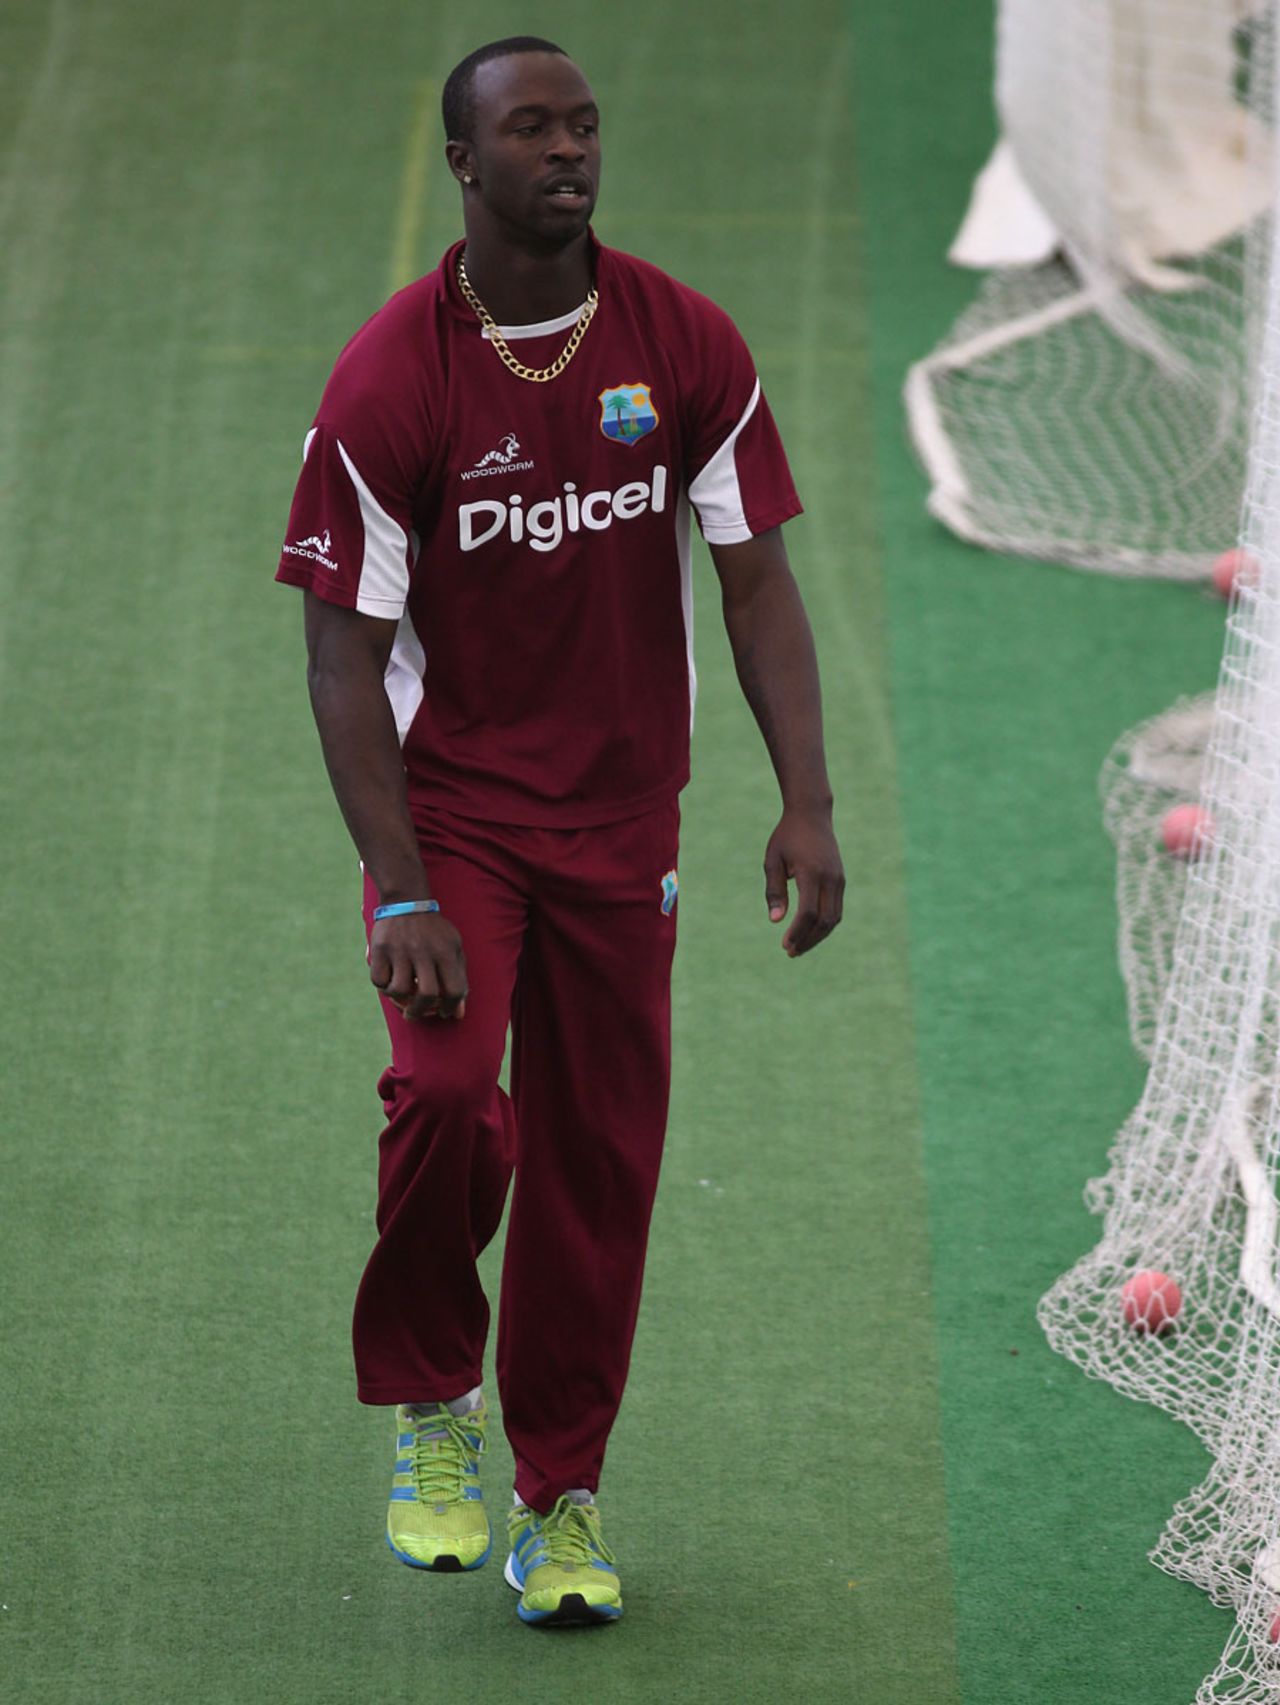 Kemar Roach bowled in the indoor nets as he tested his fitness, Lord's, May 15, 2012